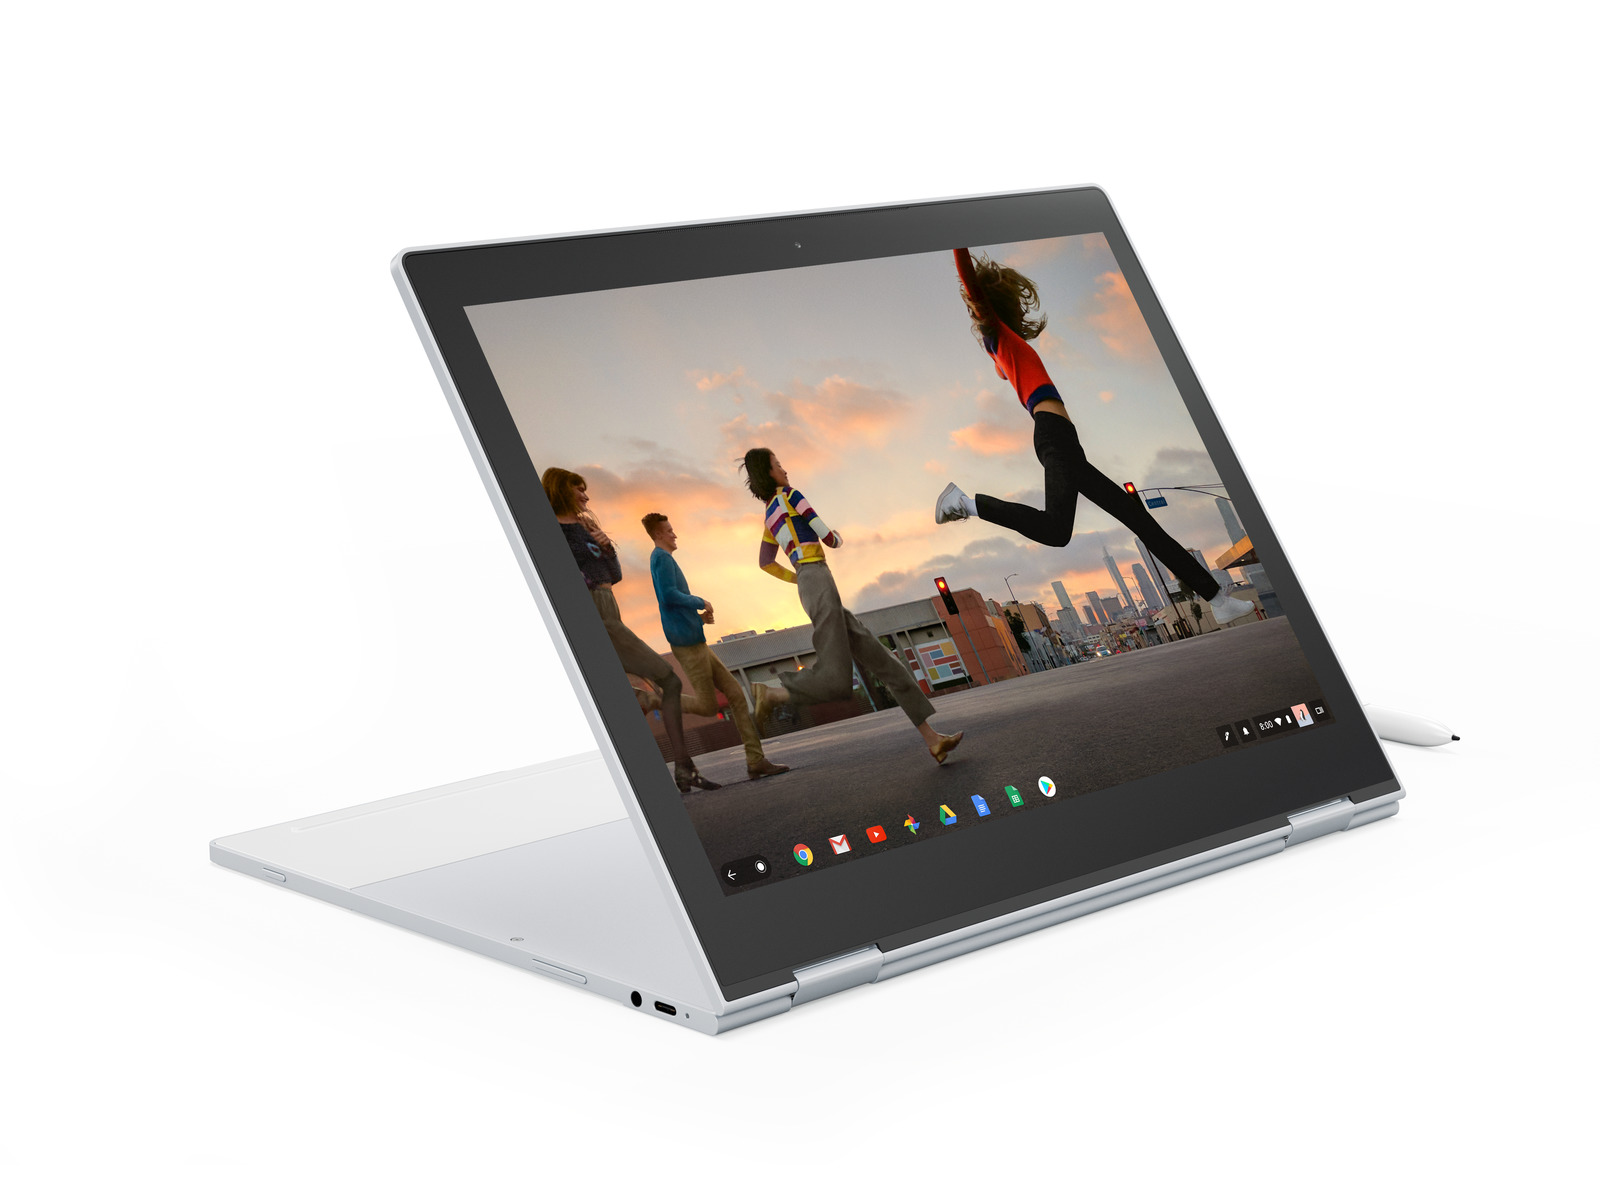 Media asset in full size related to 3dfxzone.it news item entitled as follows: Il Pixelbook Atlas di Google potrebbe avere una CPU Kaby Lake e un display 4K | Image Name: news28599_Google-Pixelbook-First-Generation_1.jpg